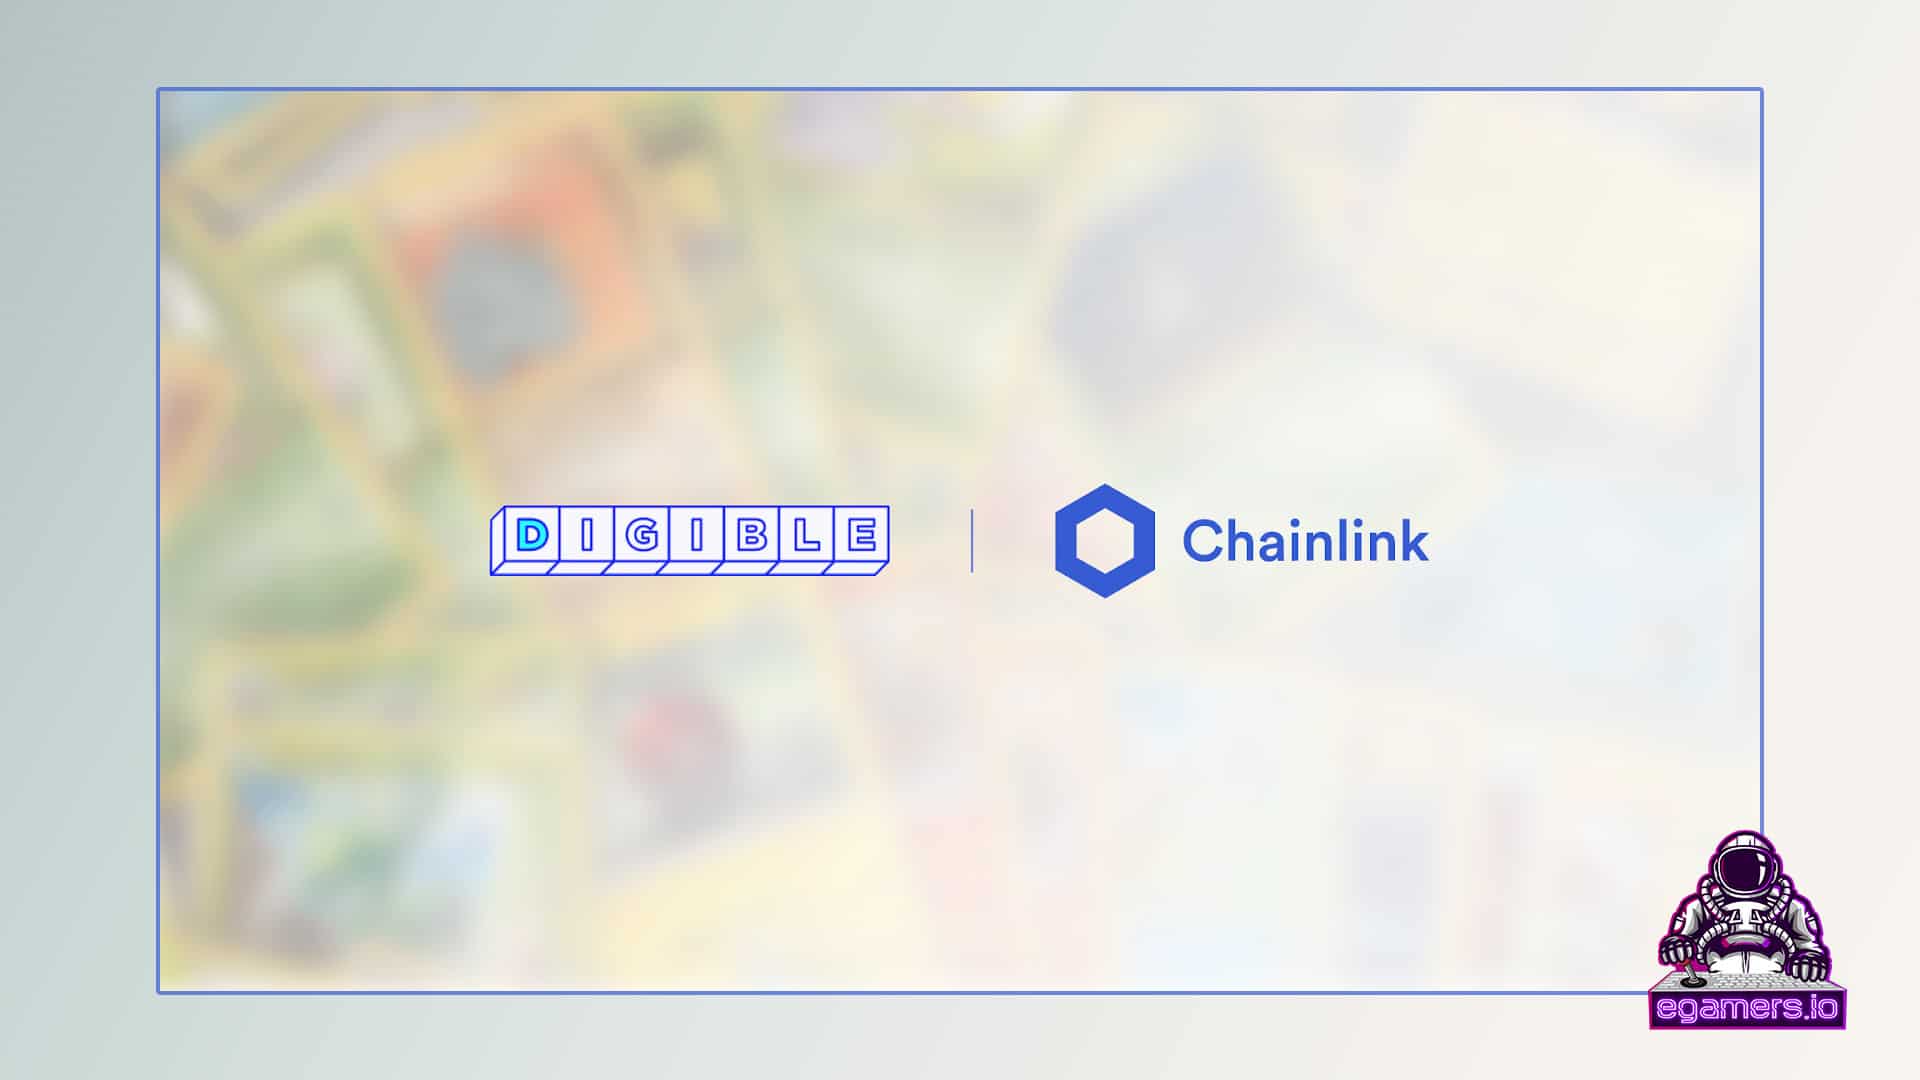 Chainlink Digible